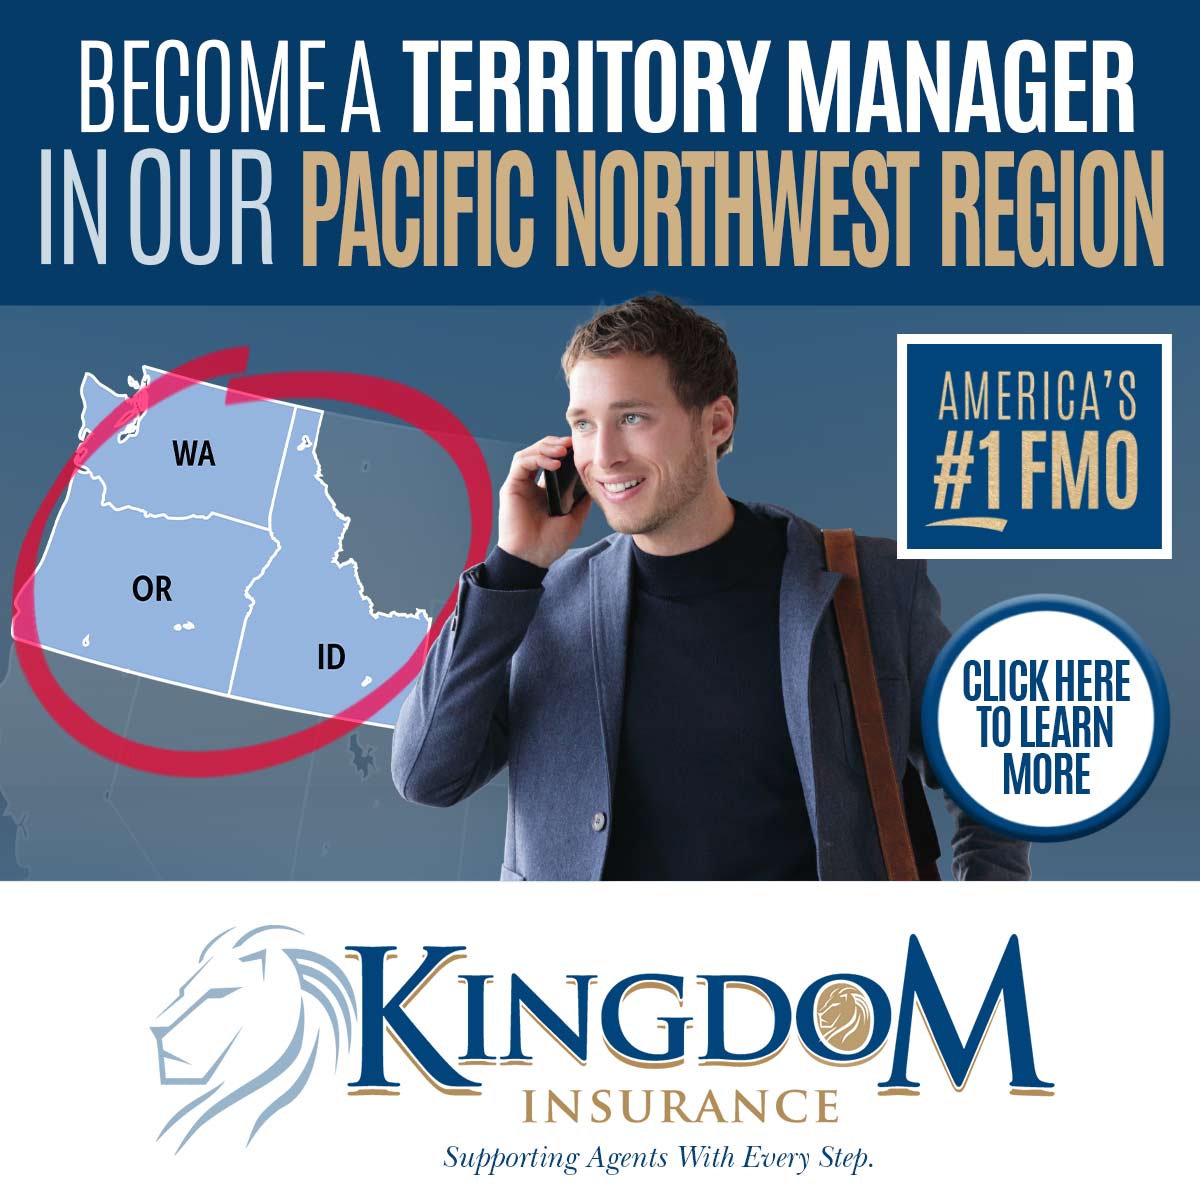 Become a Territory Manager in our Soutwest Region. American's #1 FMO. Click here to learn more. Kingdom Insurance. Supporting agents with every step.